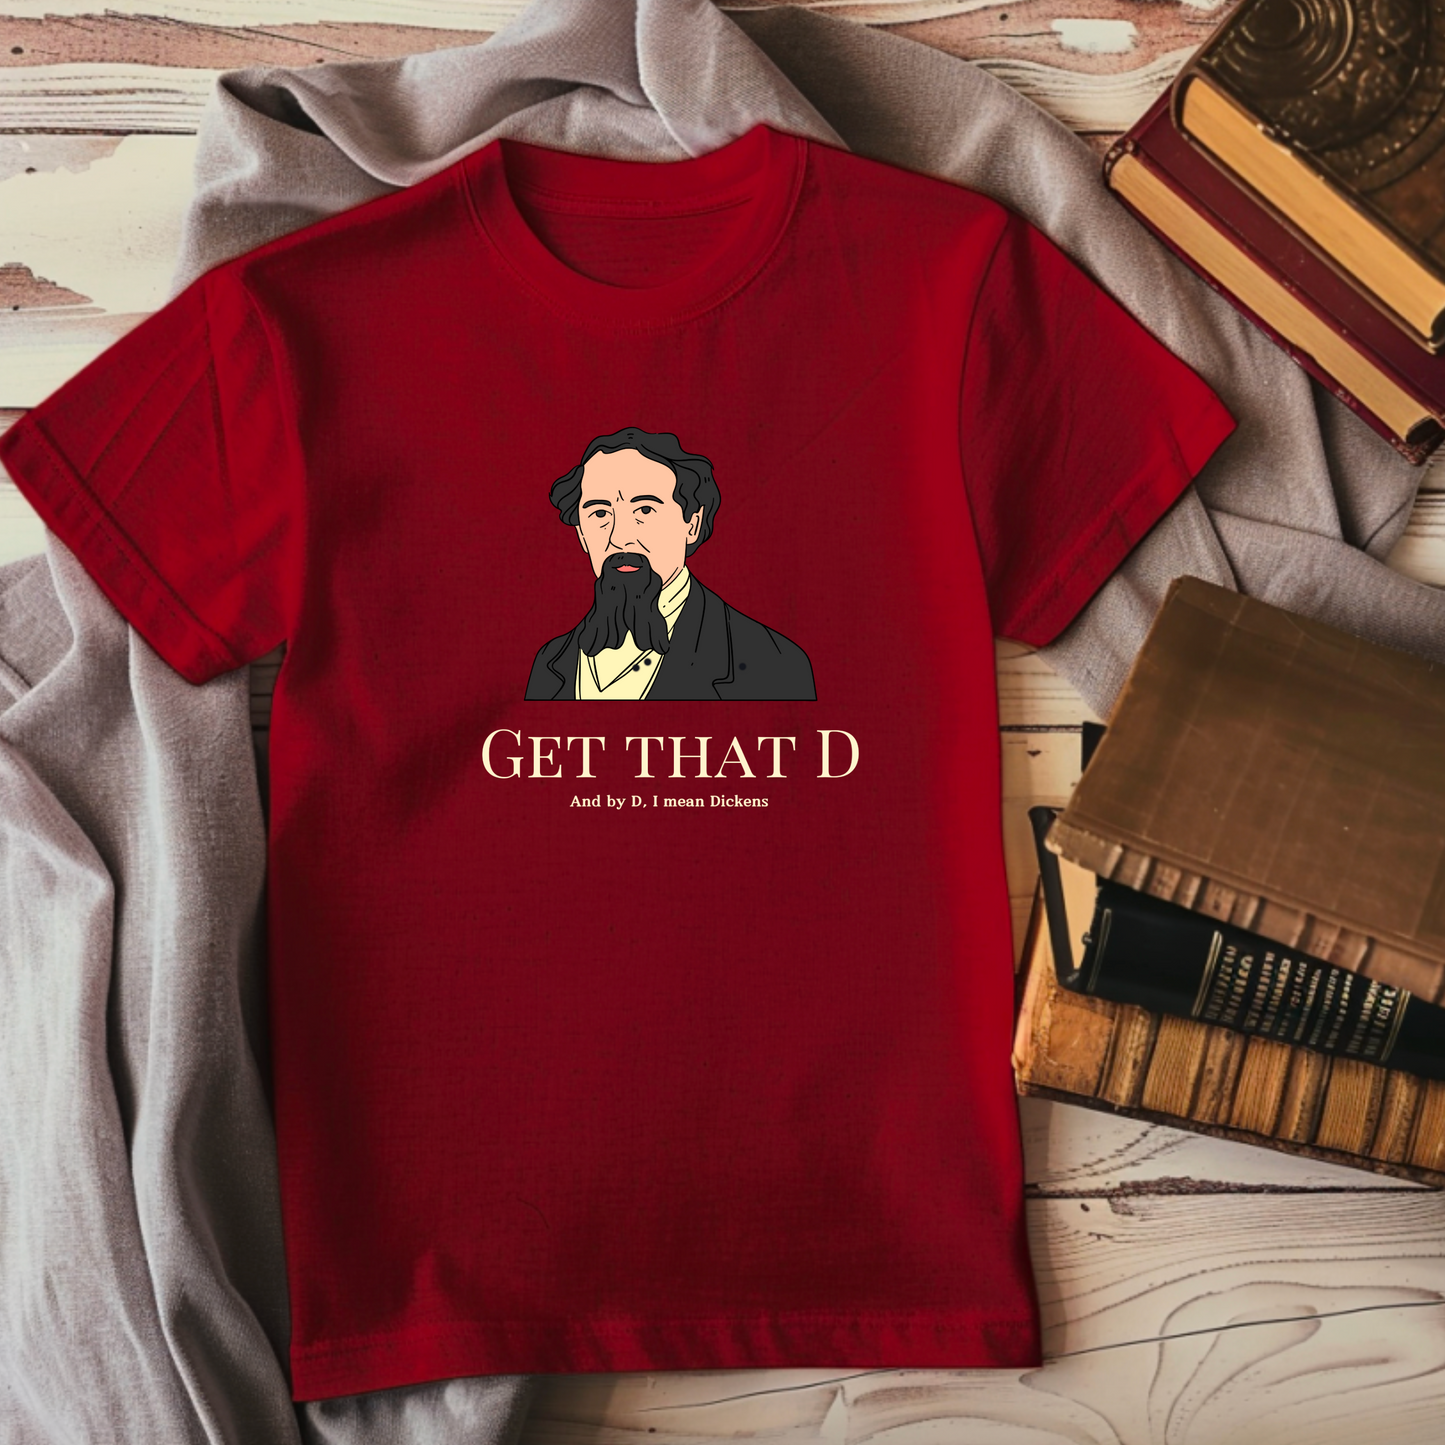 Get That D (Charles Dickens), Women's Premium Relaxed T-Shirt